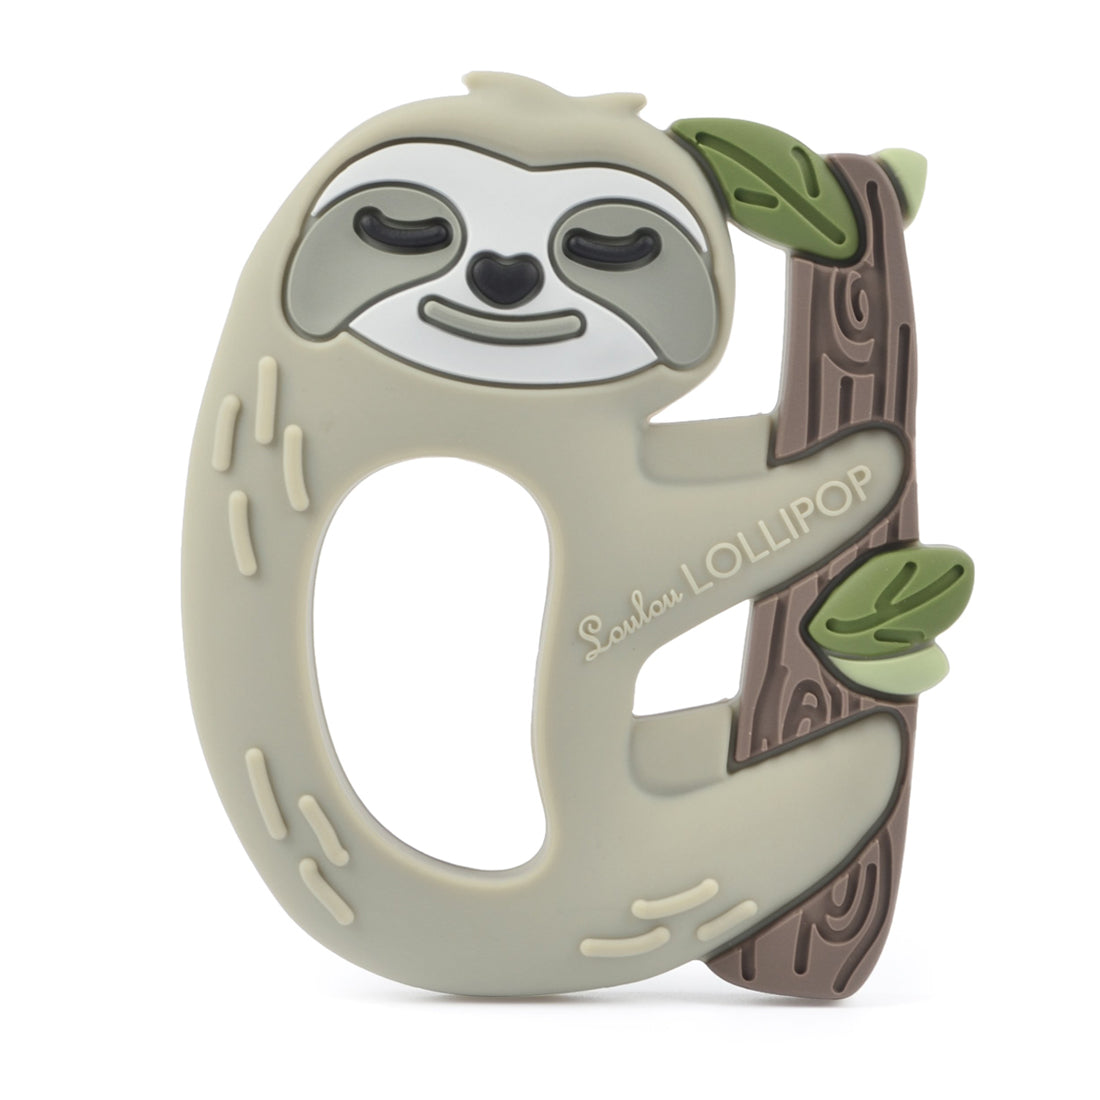 Loulou Lollipop Silicone Baby Teether Sloth